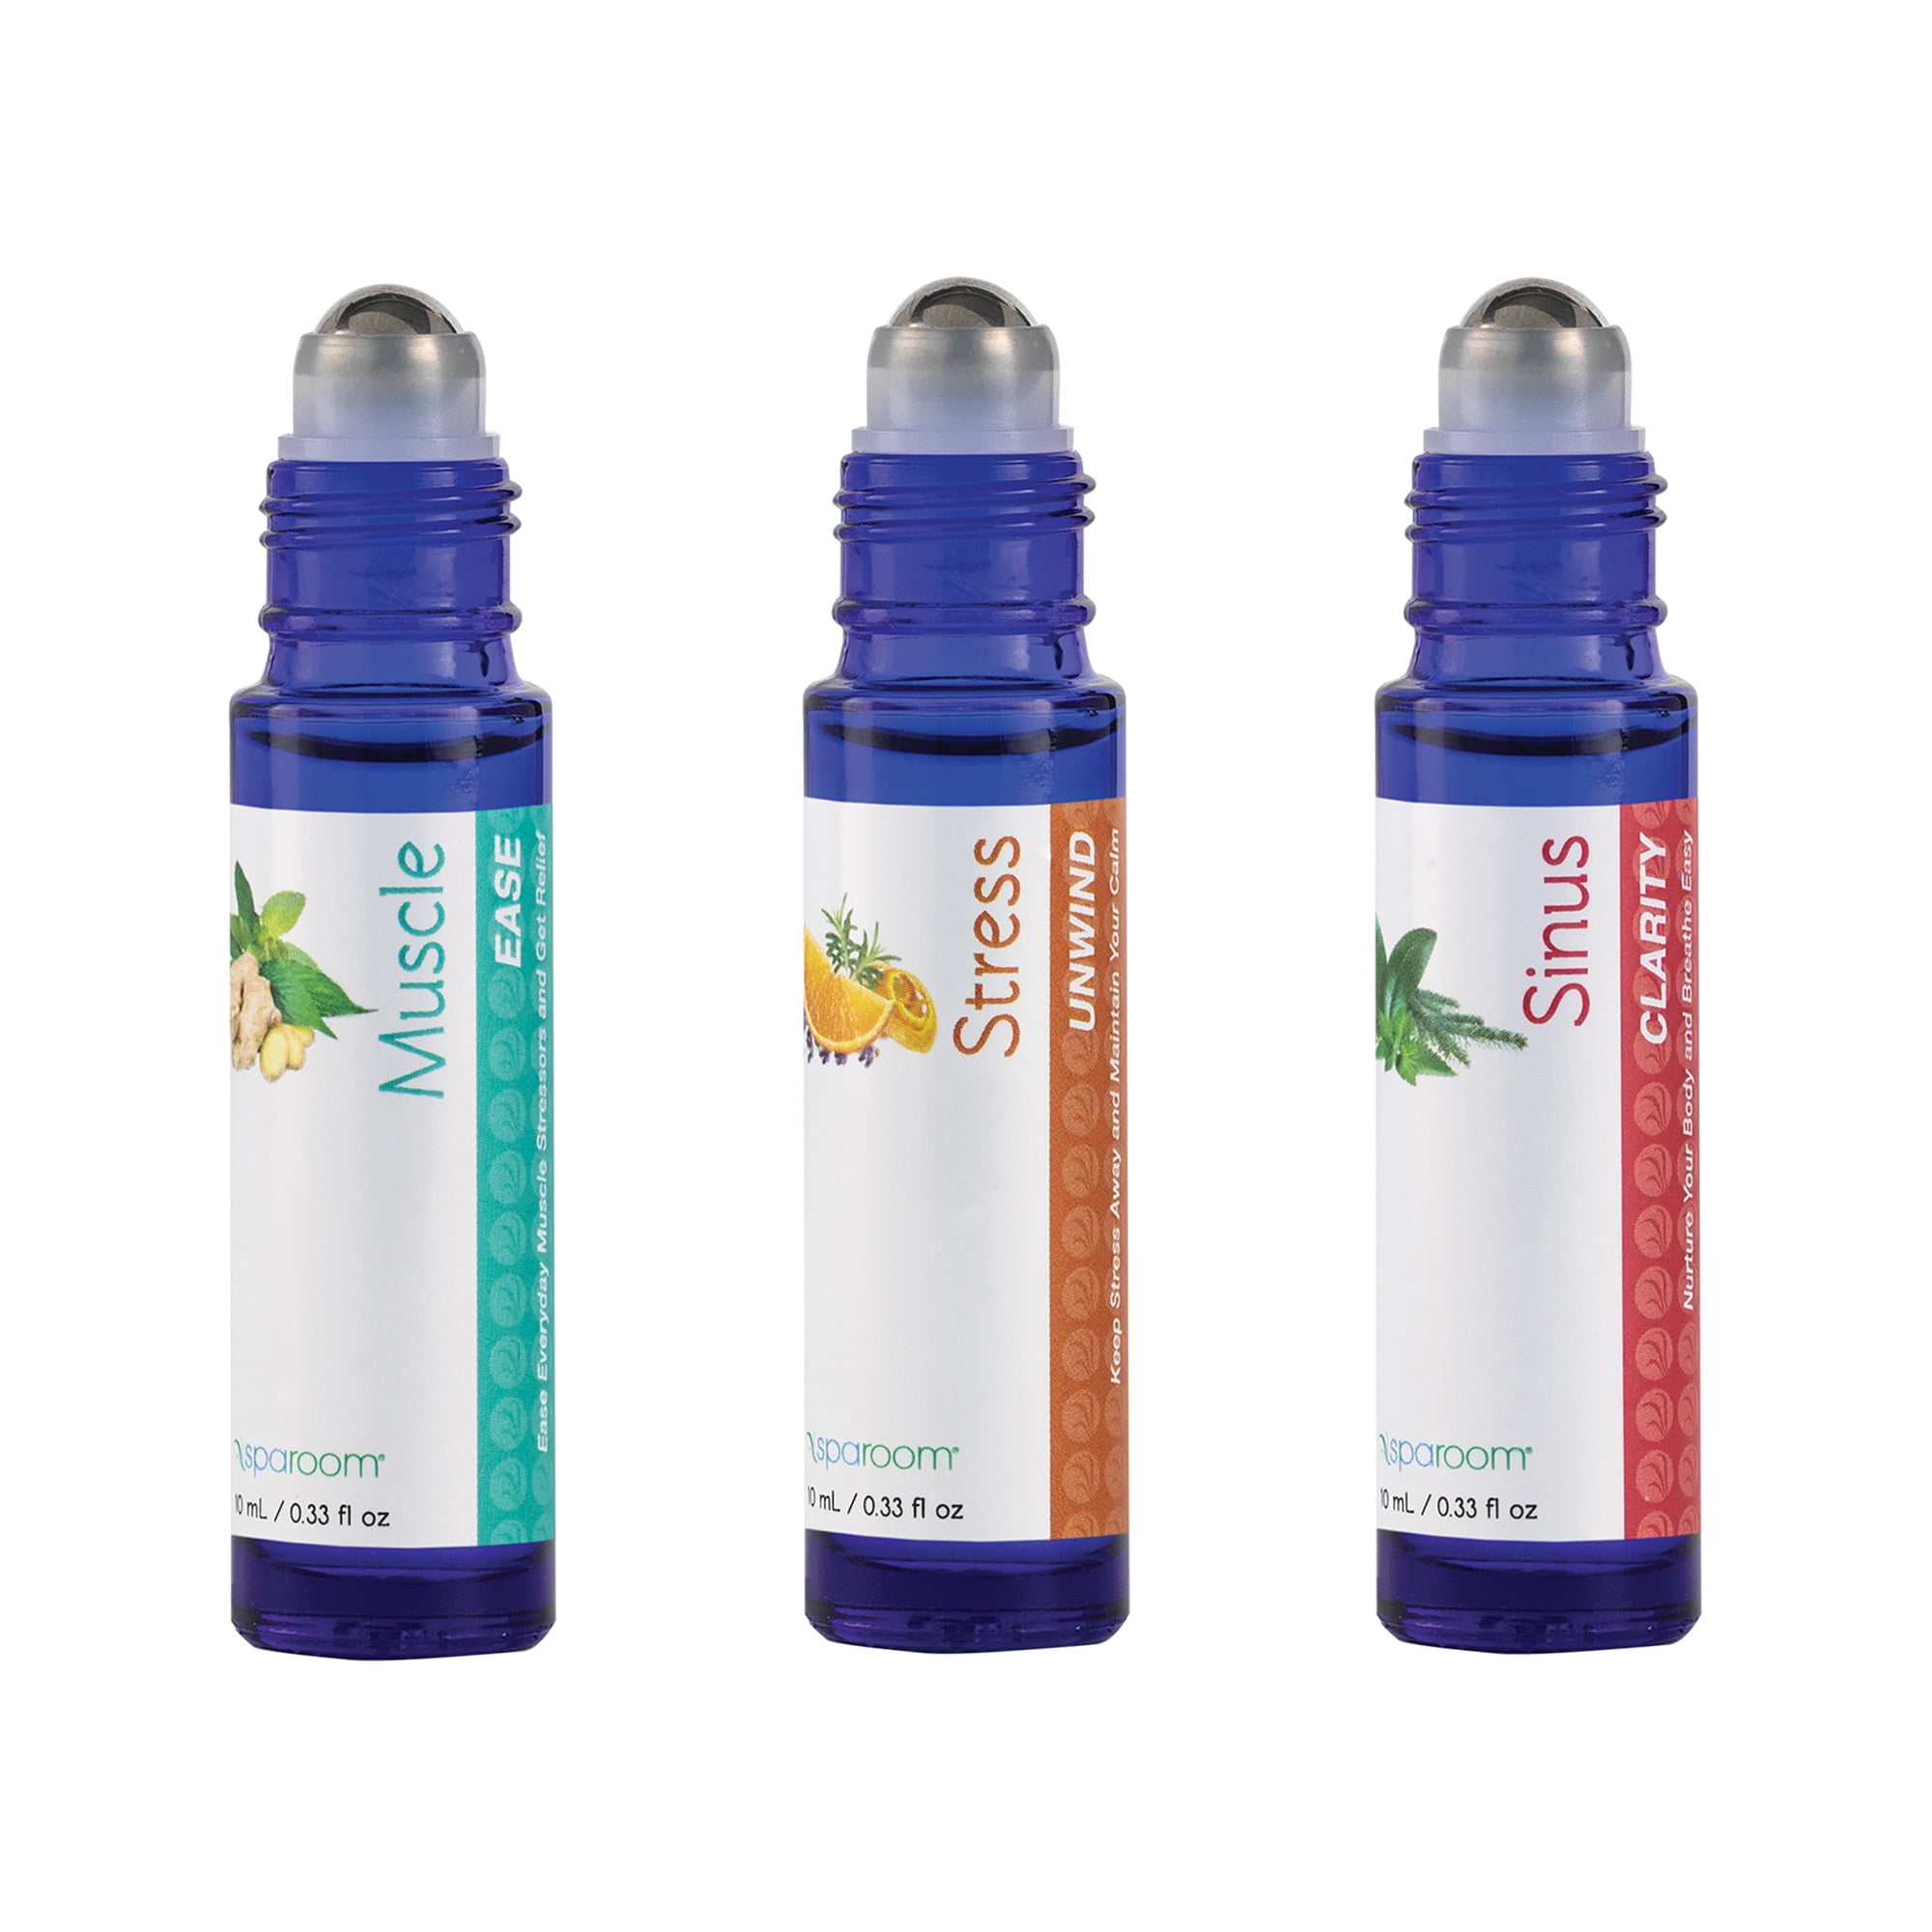 Plant Therapy Pain Support Essential Oil Roll on Blend Set 10 ml (1/3 oz) Each of Ache Away, Rapid Relief & Tension Relief, Pure, Pre-Diluted, Essenti